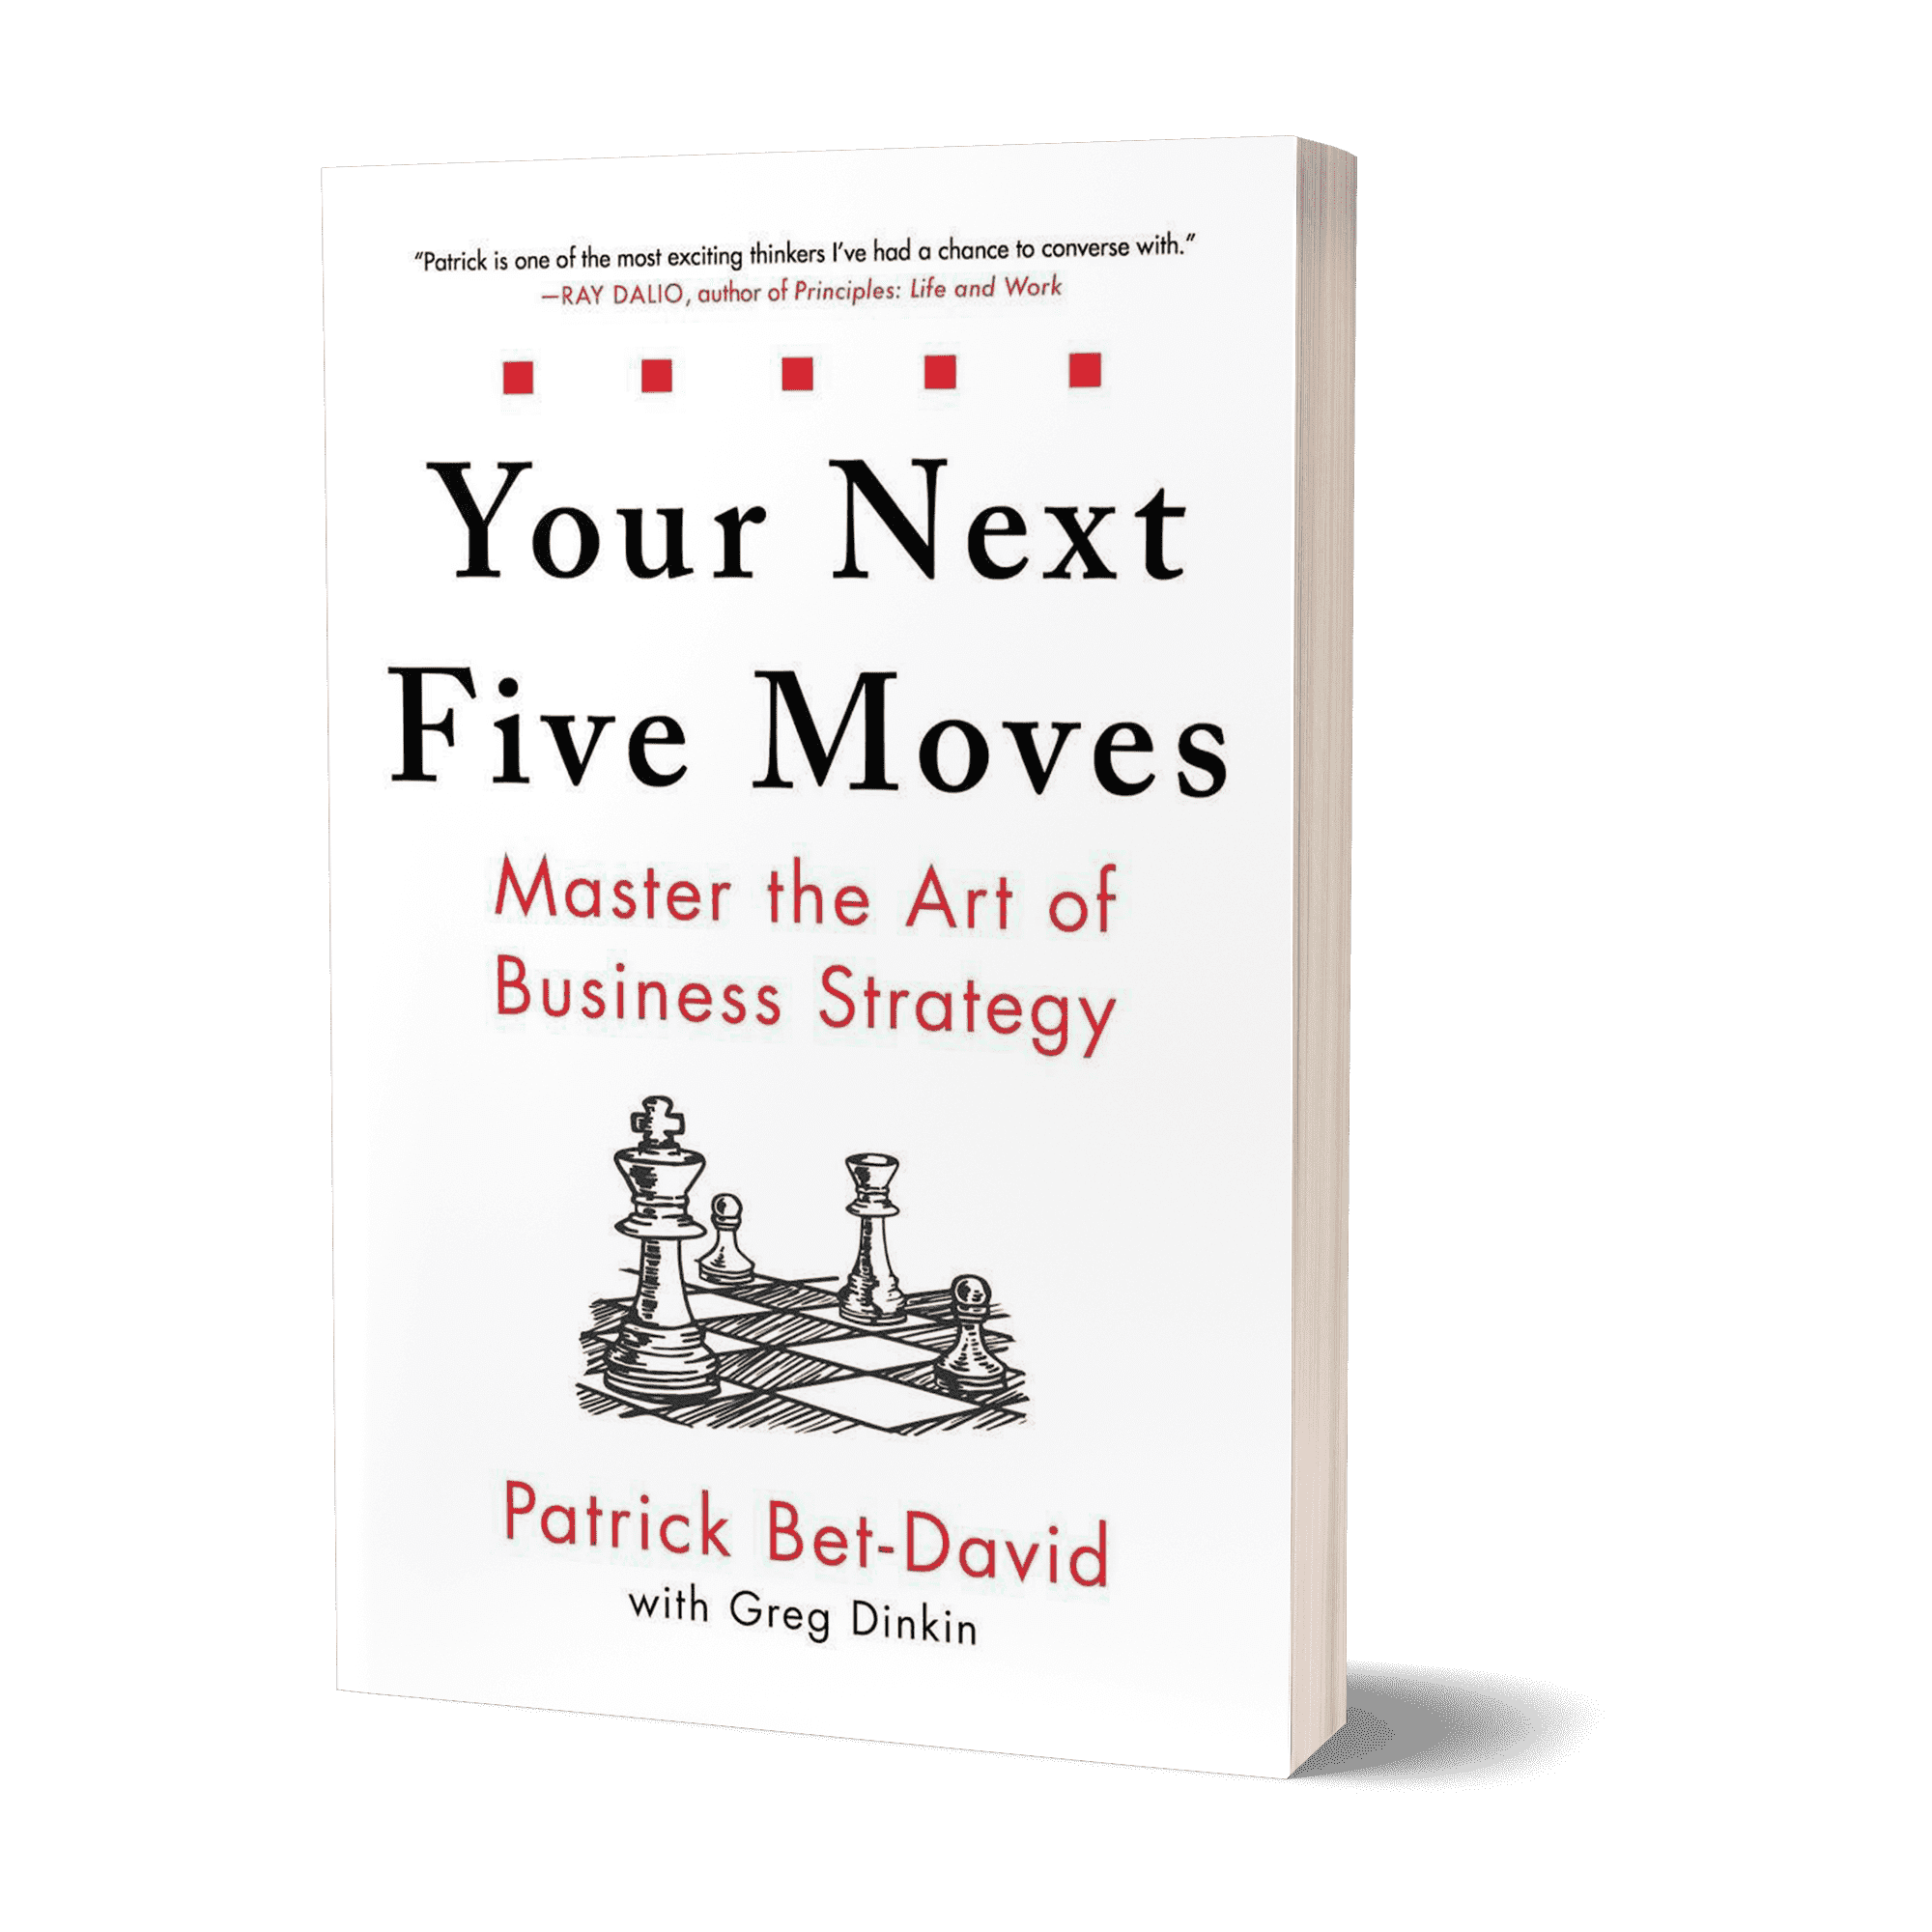 Your Next Five Moves book